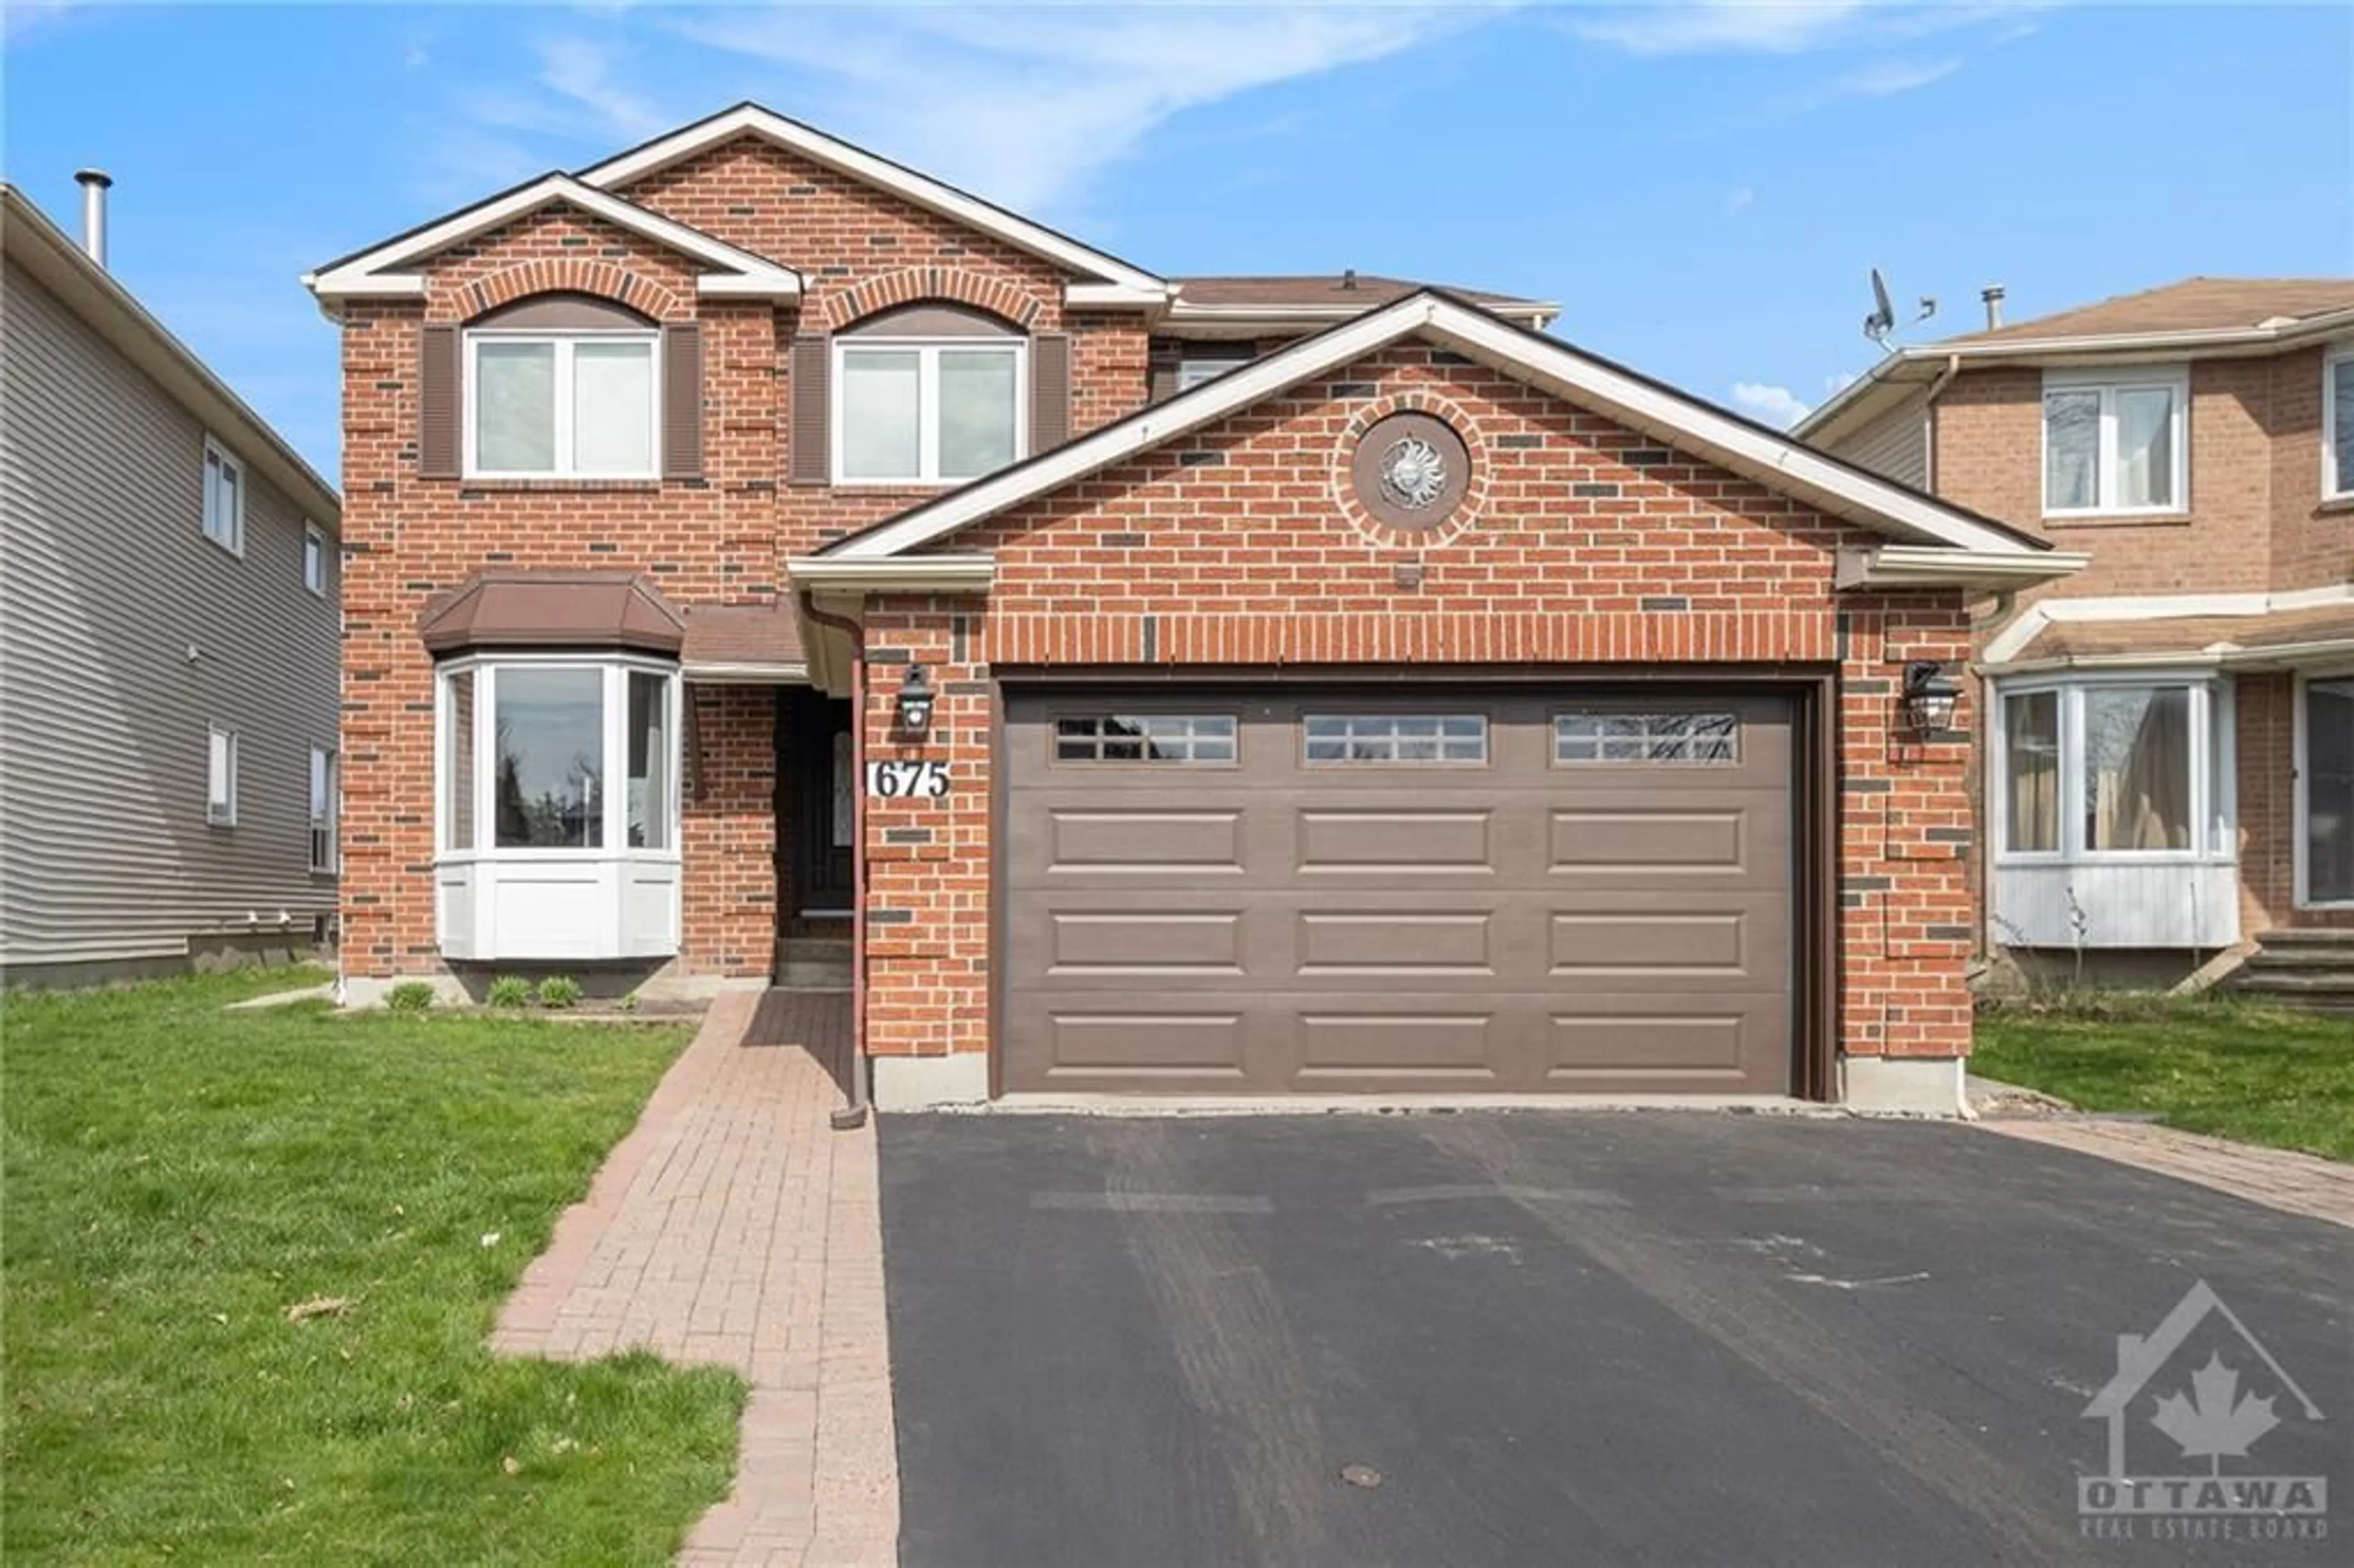 Home with brick exterior material for 675 APOLLO Way, Orleans Ontario K4A 1S7